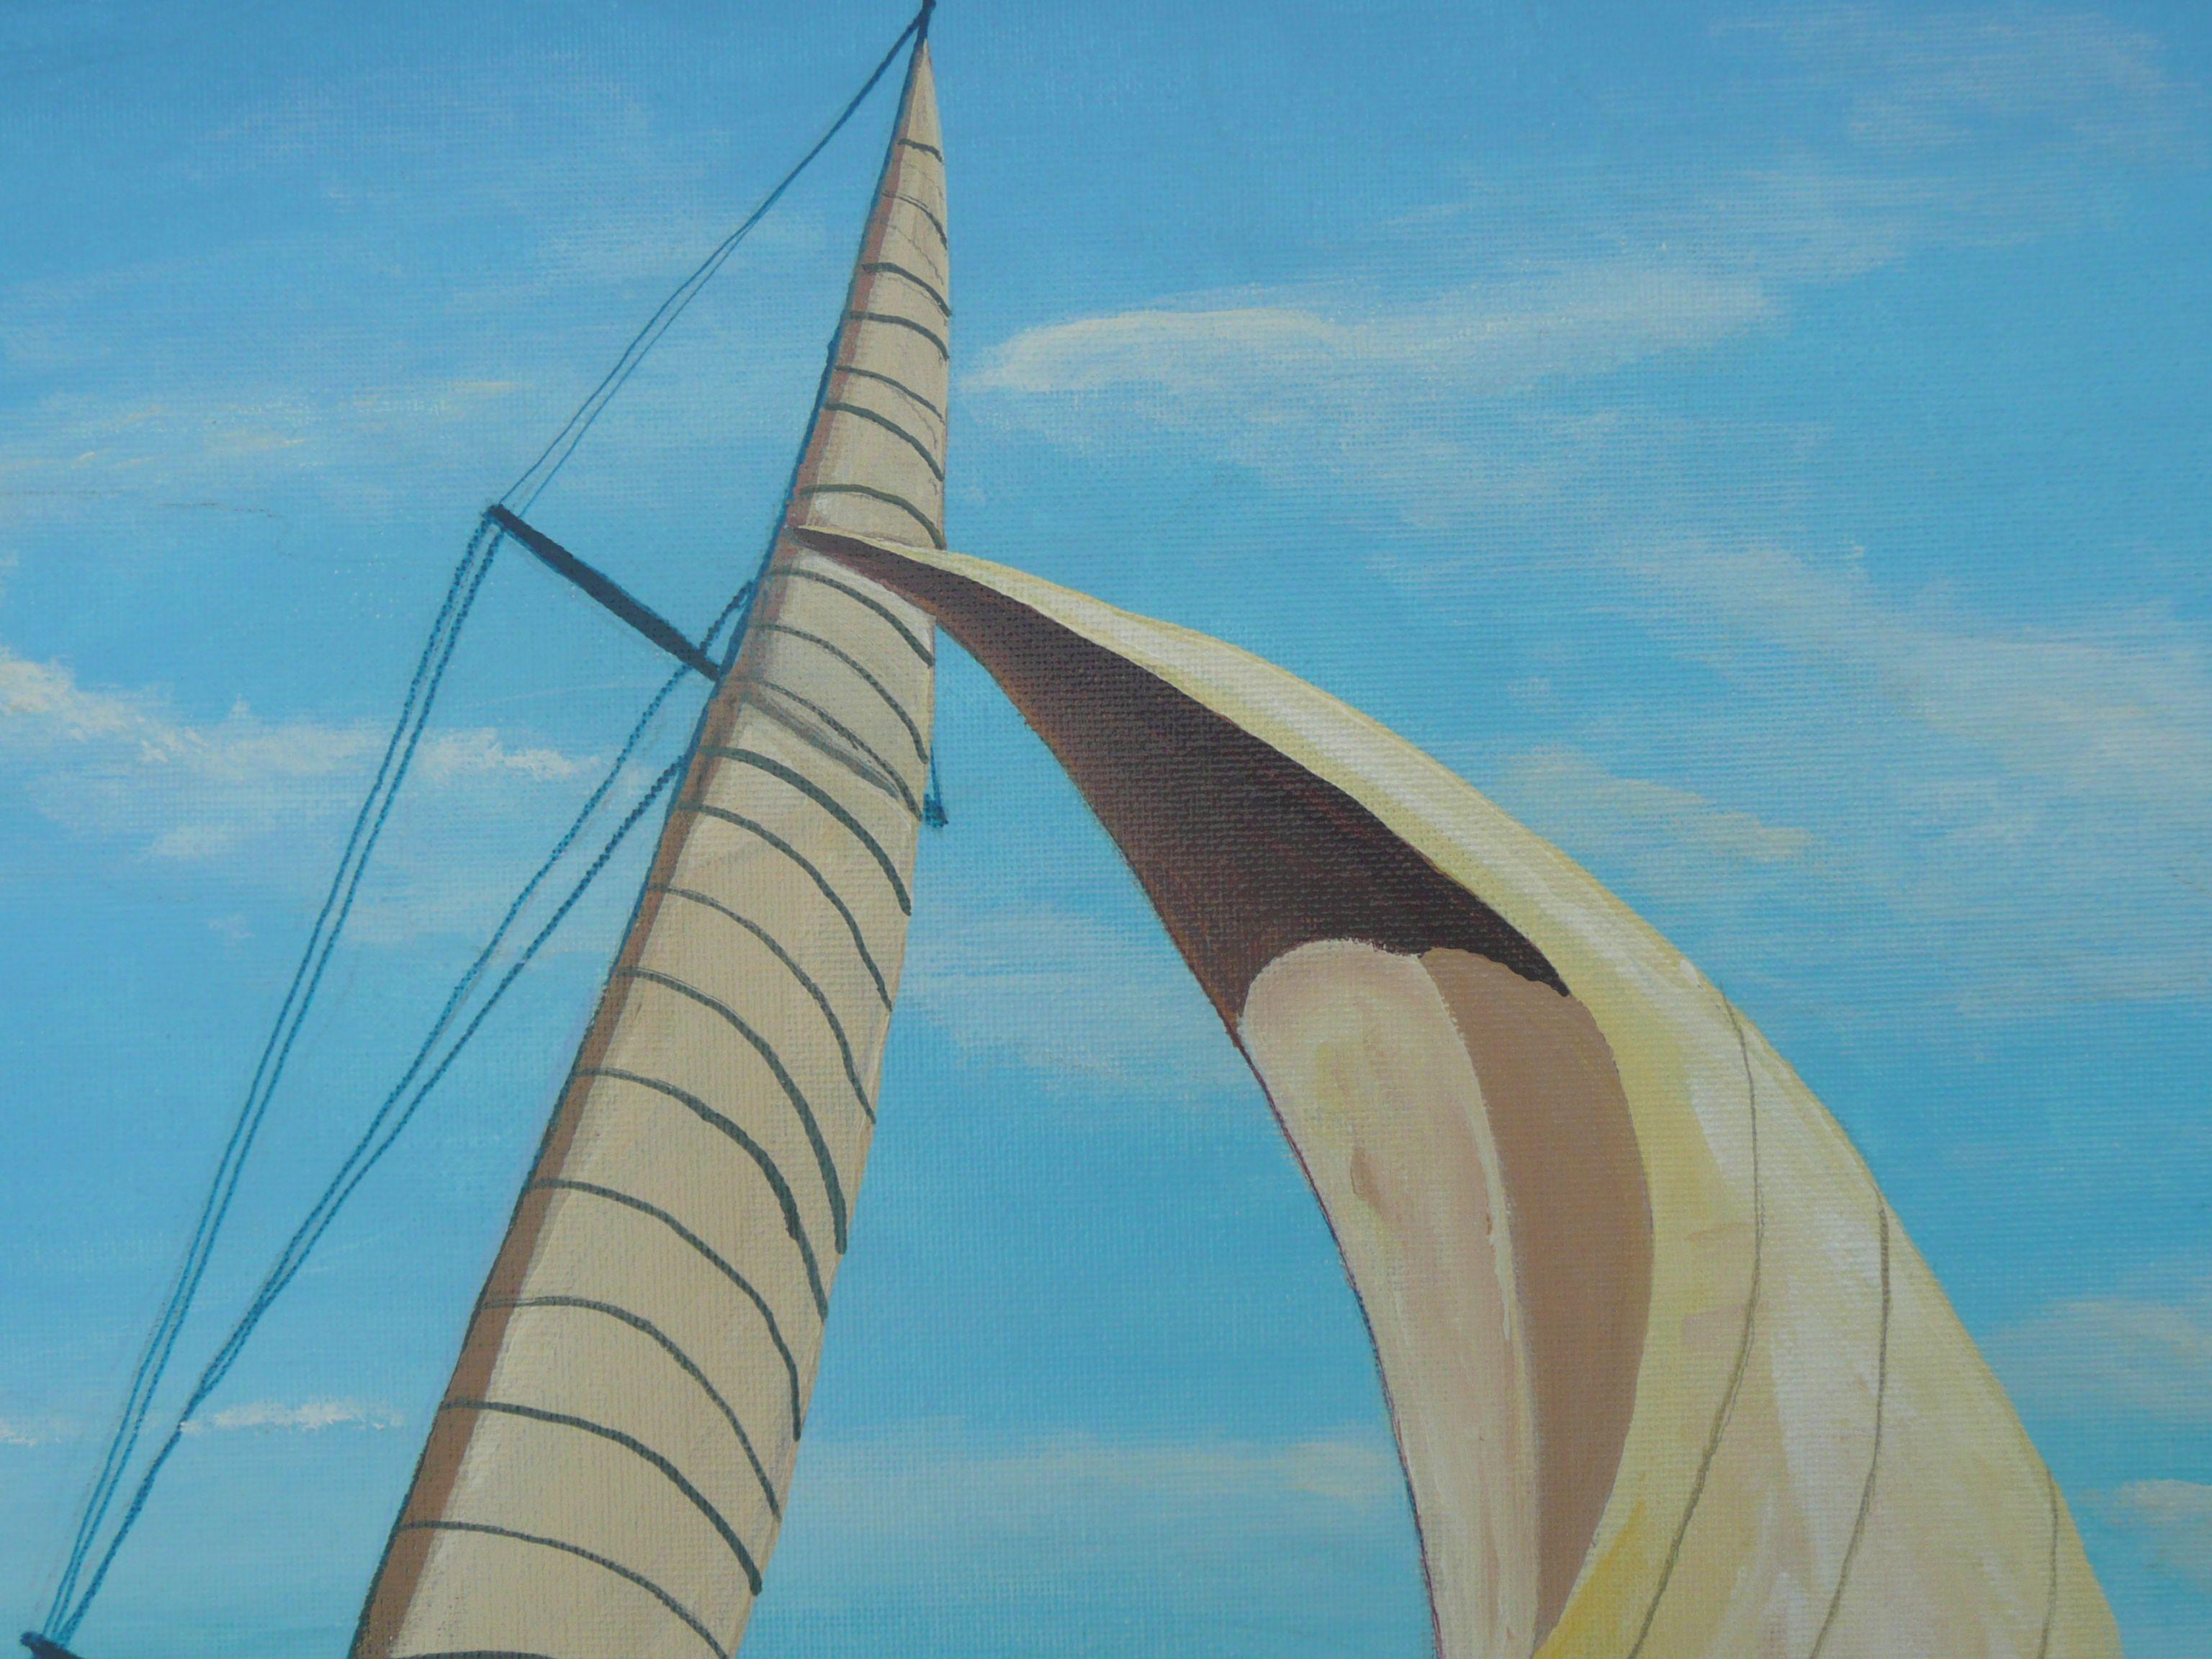 A pair of sailing yachts are going full out in a race with the wind over the sea with their spinnakers fully extended for maximum effect. Very exciting ride!! This sailing painting has been created using professional grade acrylics on archival flat